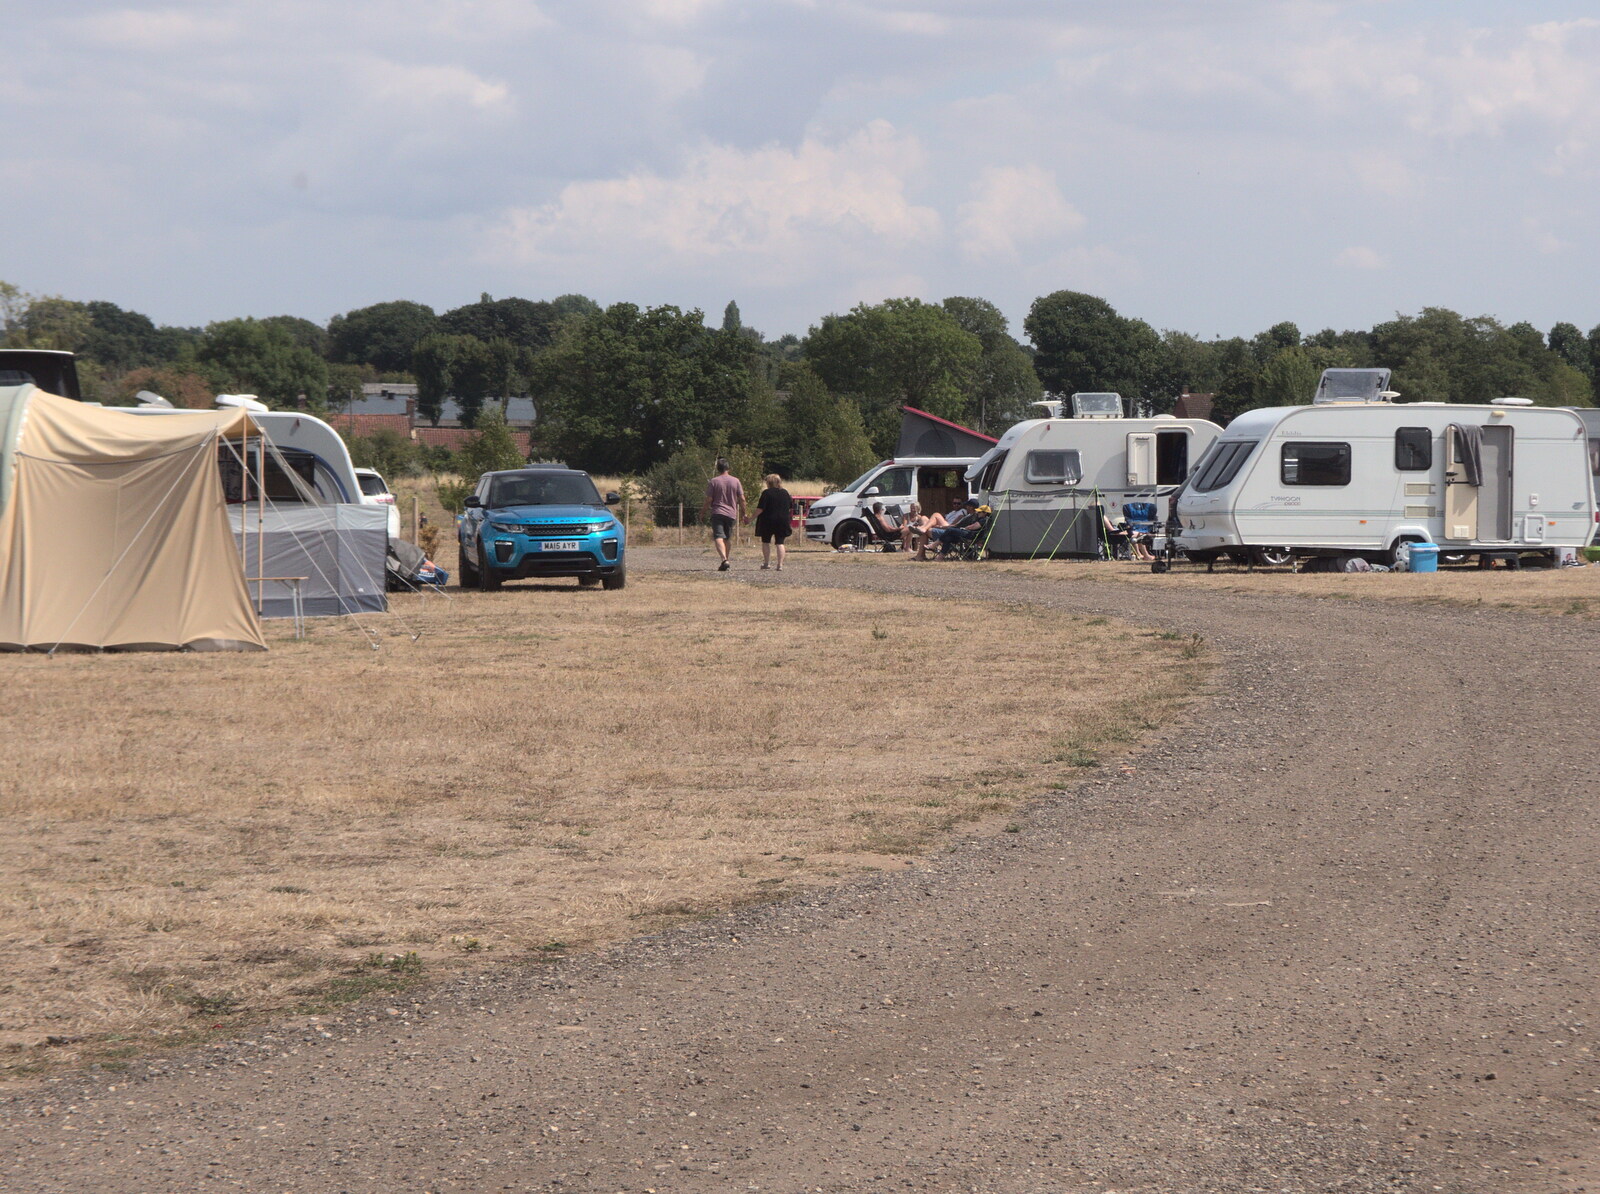 On a parched Old Buckenham campsite from A Trip to Old Buckenham Airfield, Norfolk - 6th August 2022